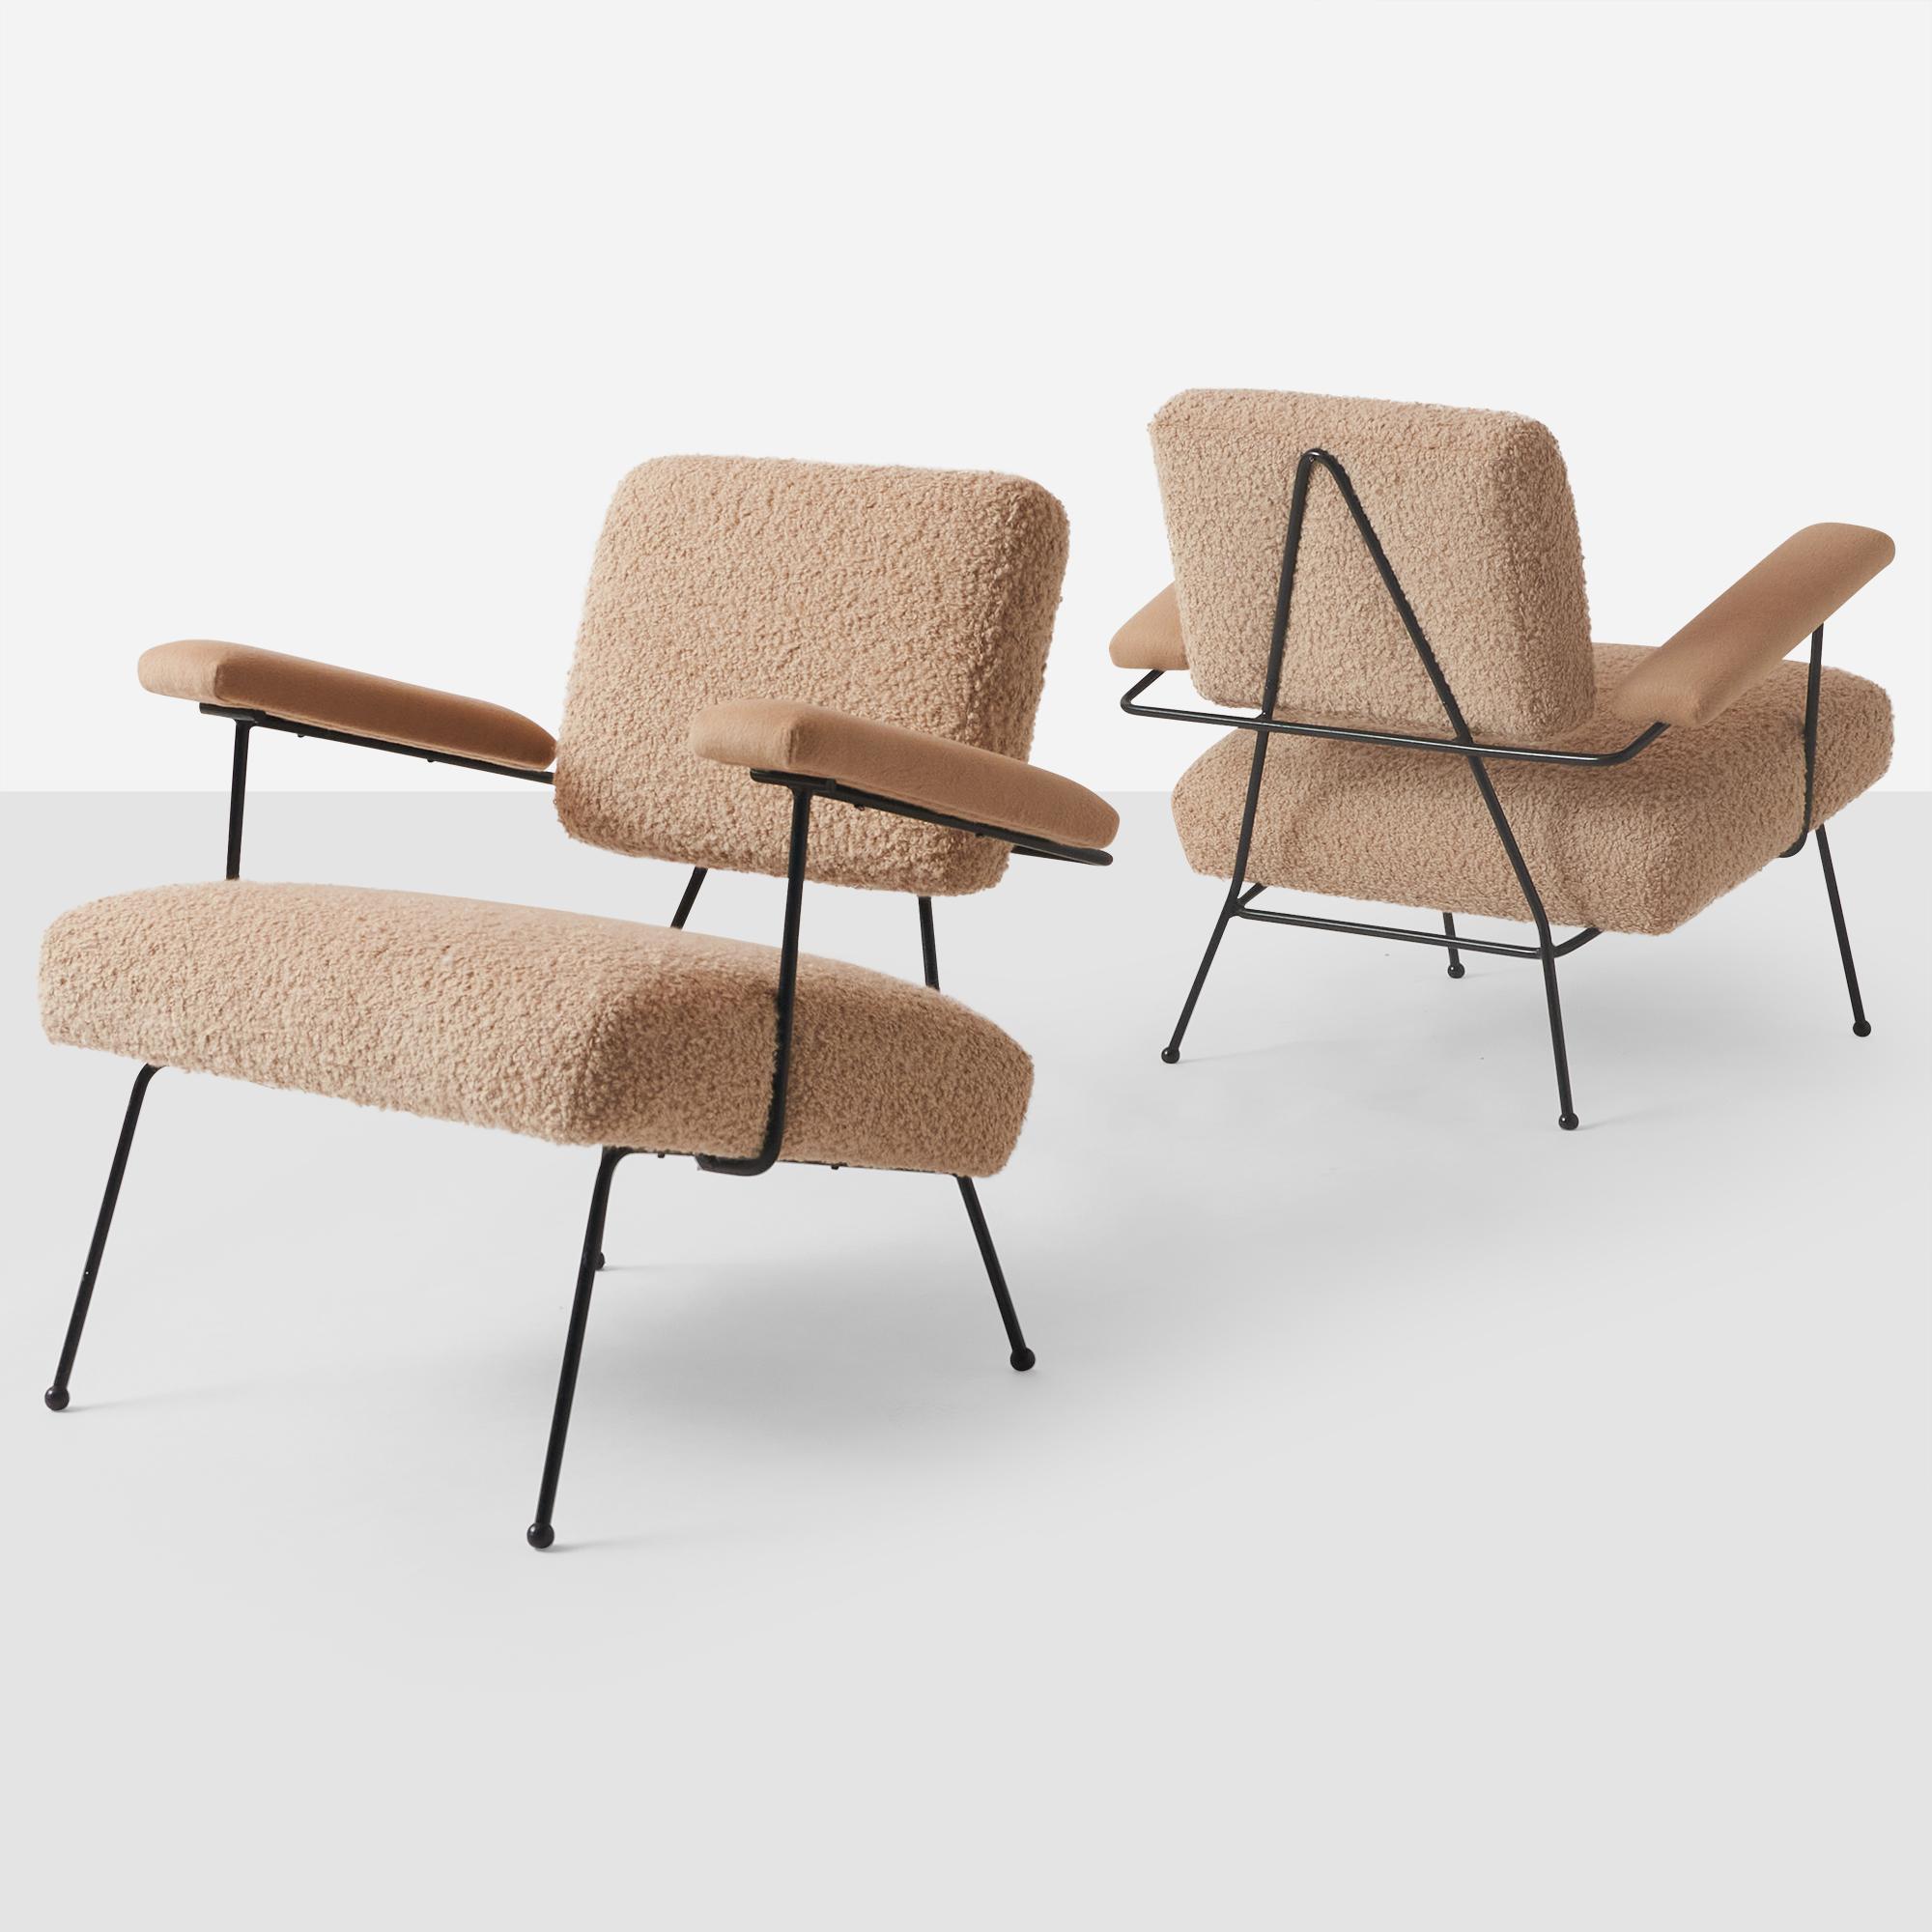 A pair of iron lounge chairs, model #104C, by Adrian Pearsall for Craft Associates. Seat and back have been recovered in a Sandra Jordan Prima Alpaca fawn bouclé and armrests covered in a complimentary solid fawn fabric.